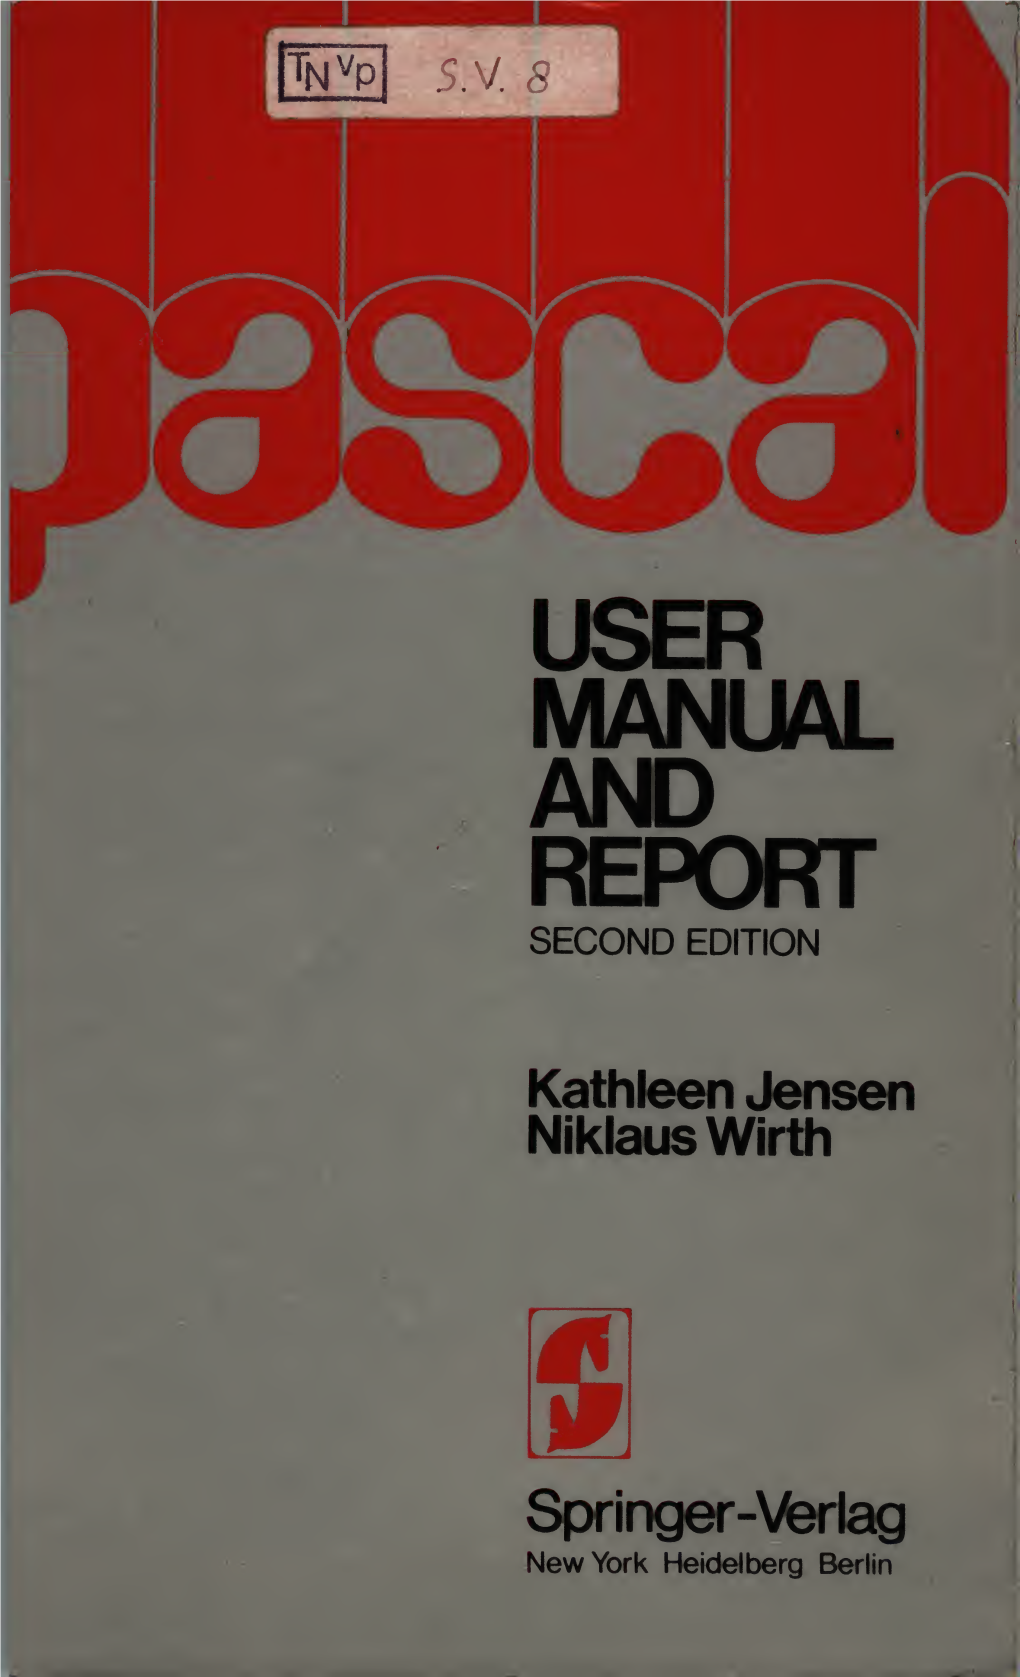 Pascal User Manual and Report Second Edition